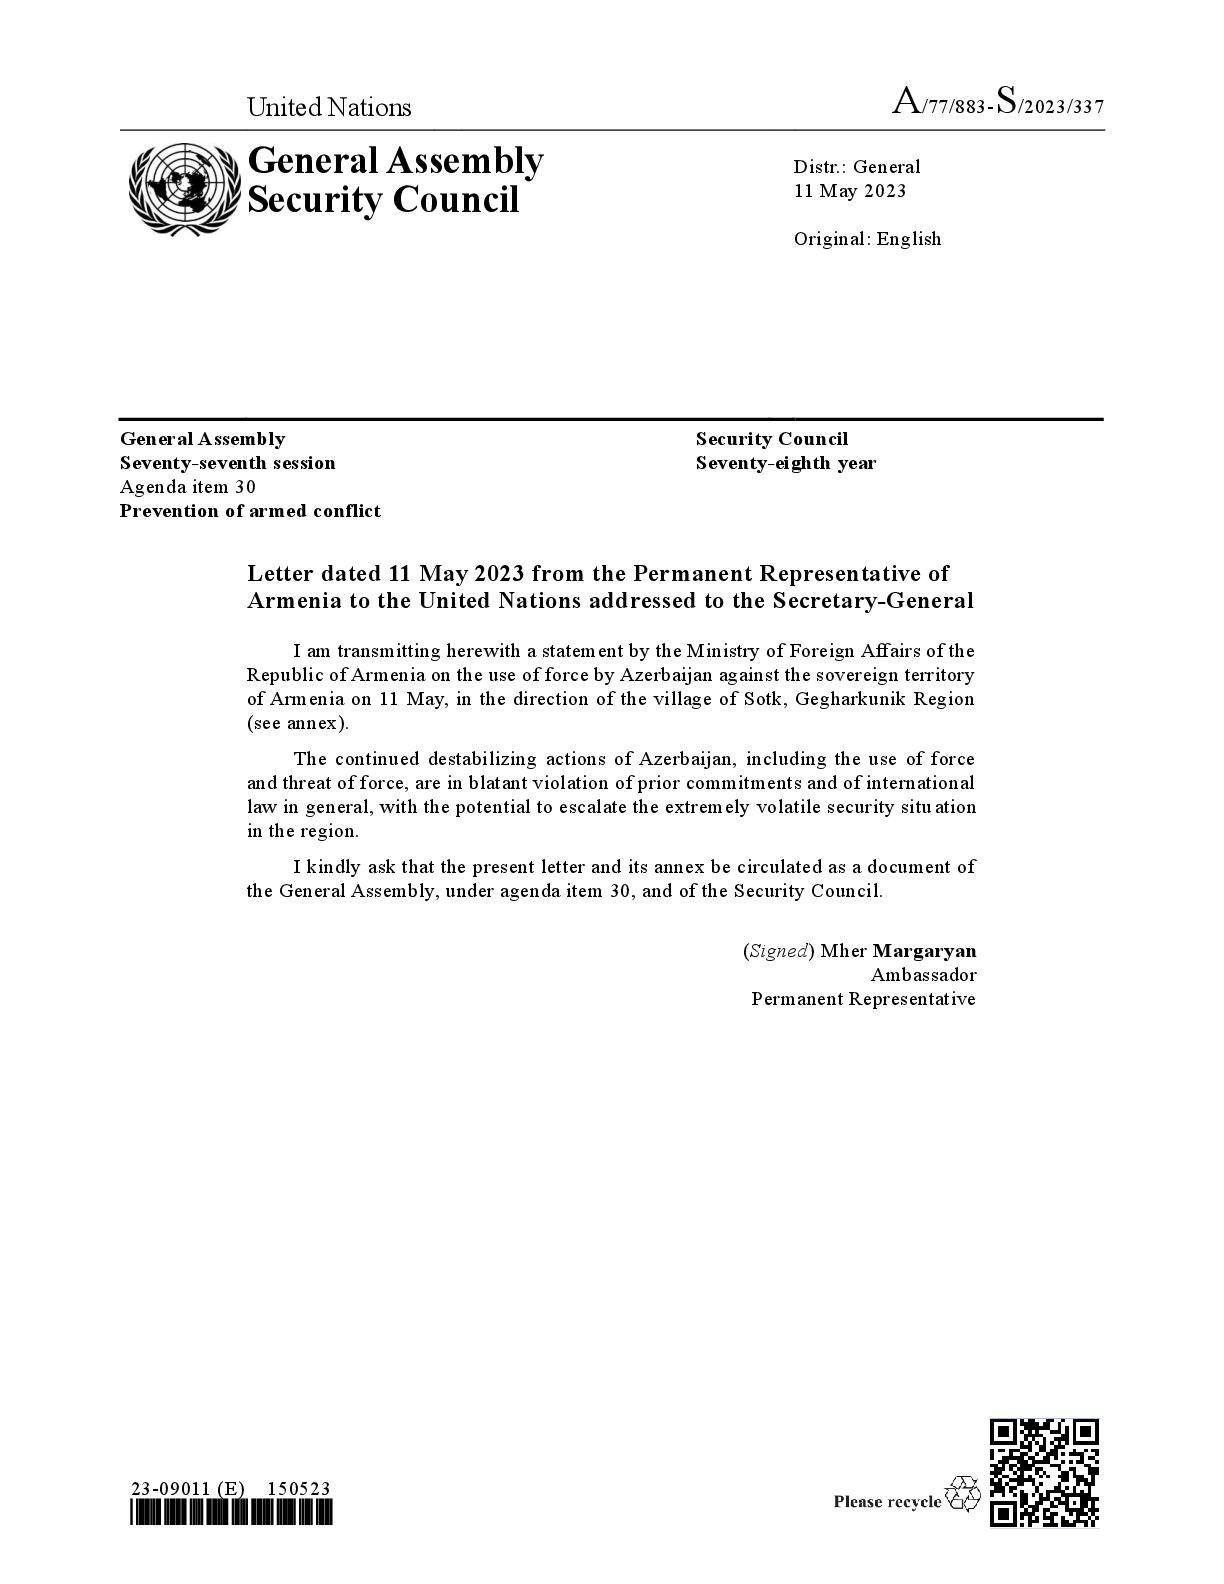 Letter from the Permanent Representative of Armenia on the use of force by Azerbaijan against the sovereign territory of Armenia on 11 May